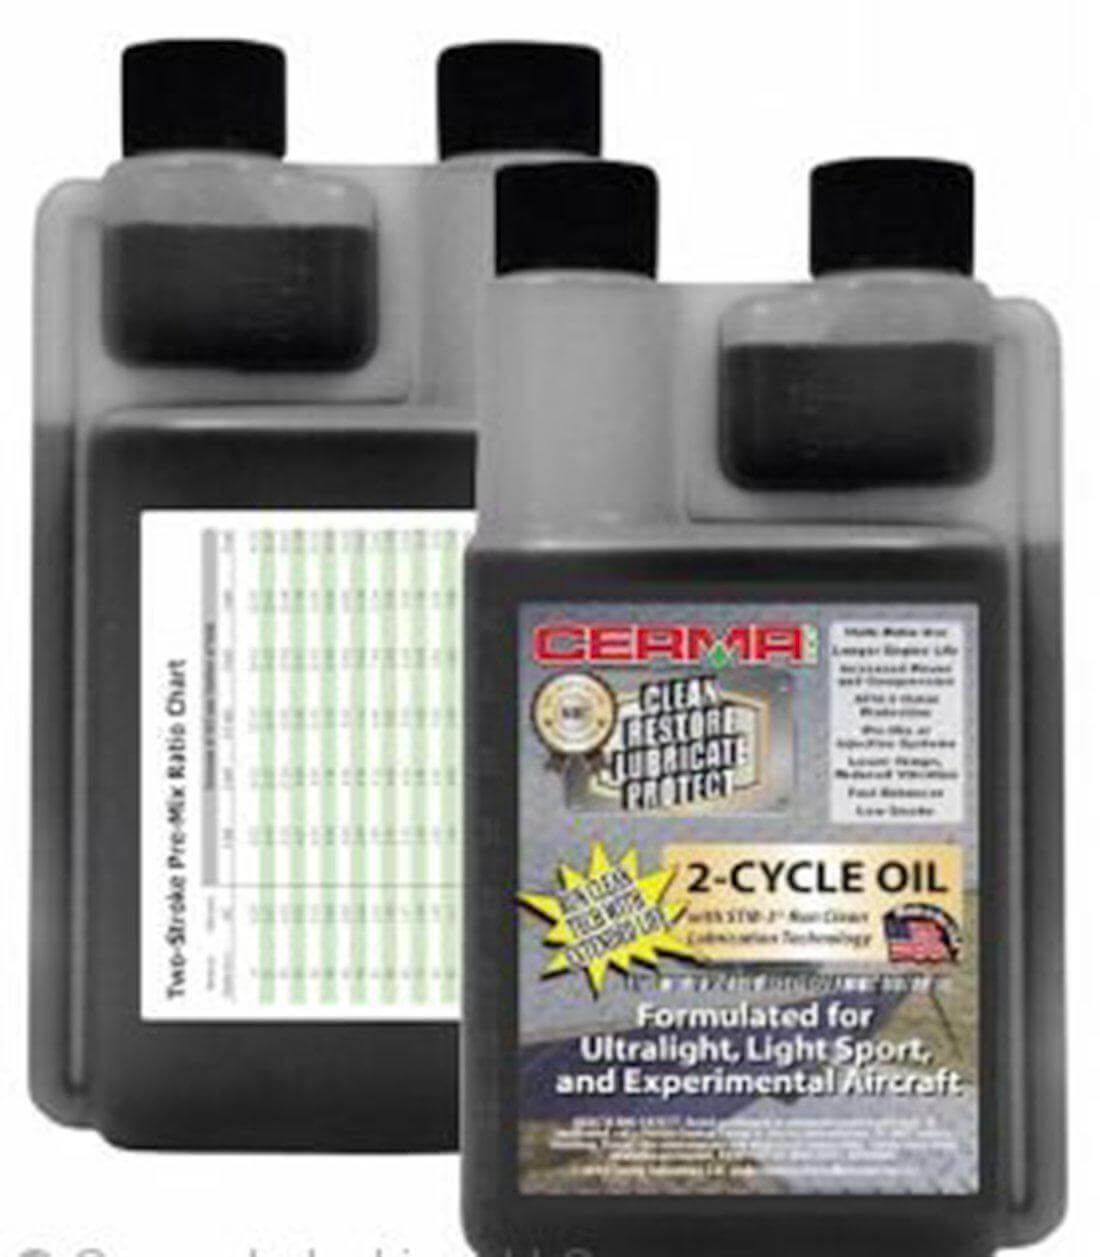 Cermax Air Ceramic 2-Cycle Multi-Ratio Oil at $18.75 only from cermatreatment.com